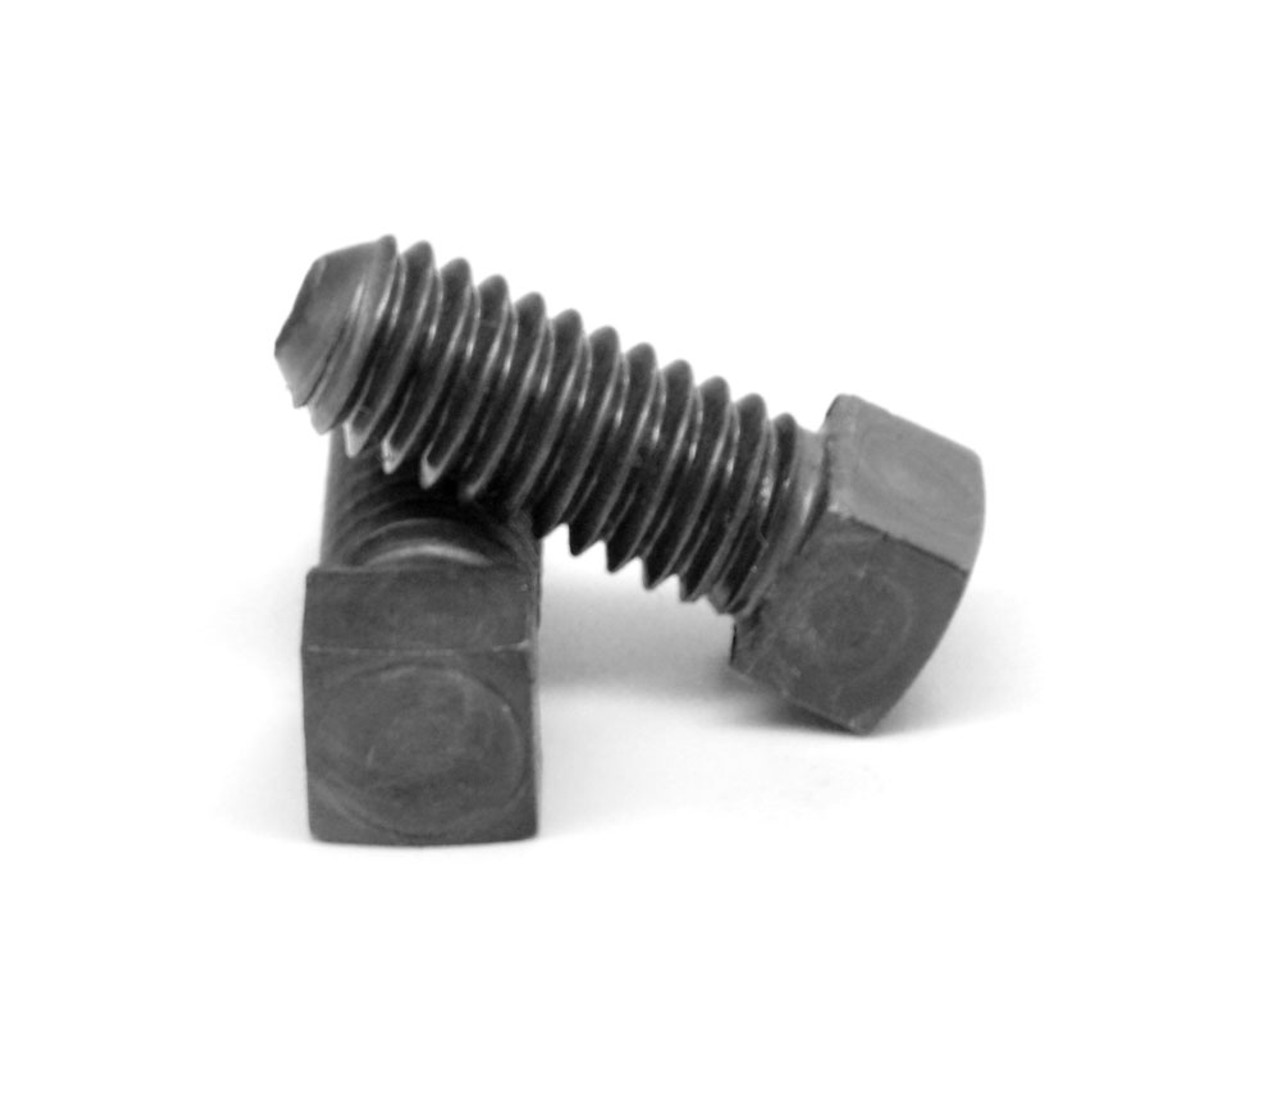 1/4"-20 x 2" (FT) Coarse Thread Square Head Set Screw Cup Point Low Carbon Steel Case Hardened Plain Finish